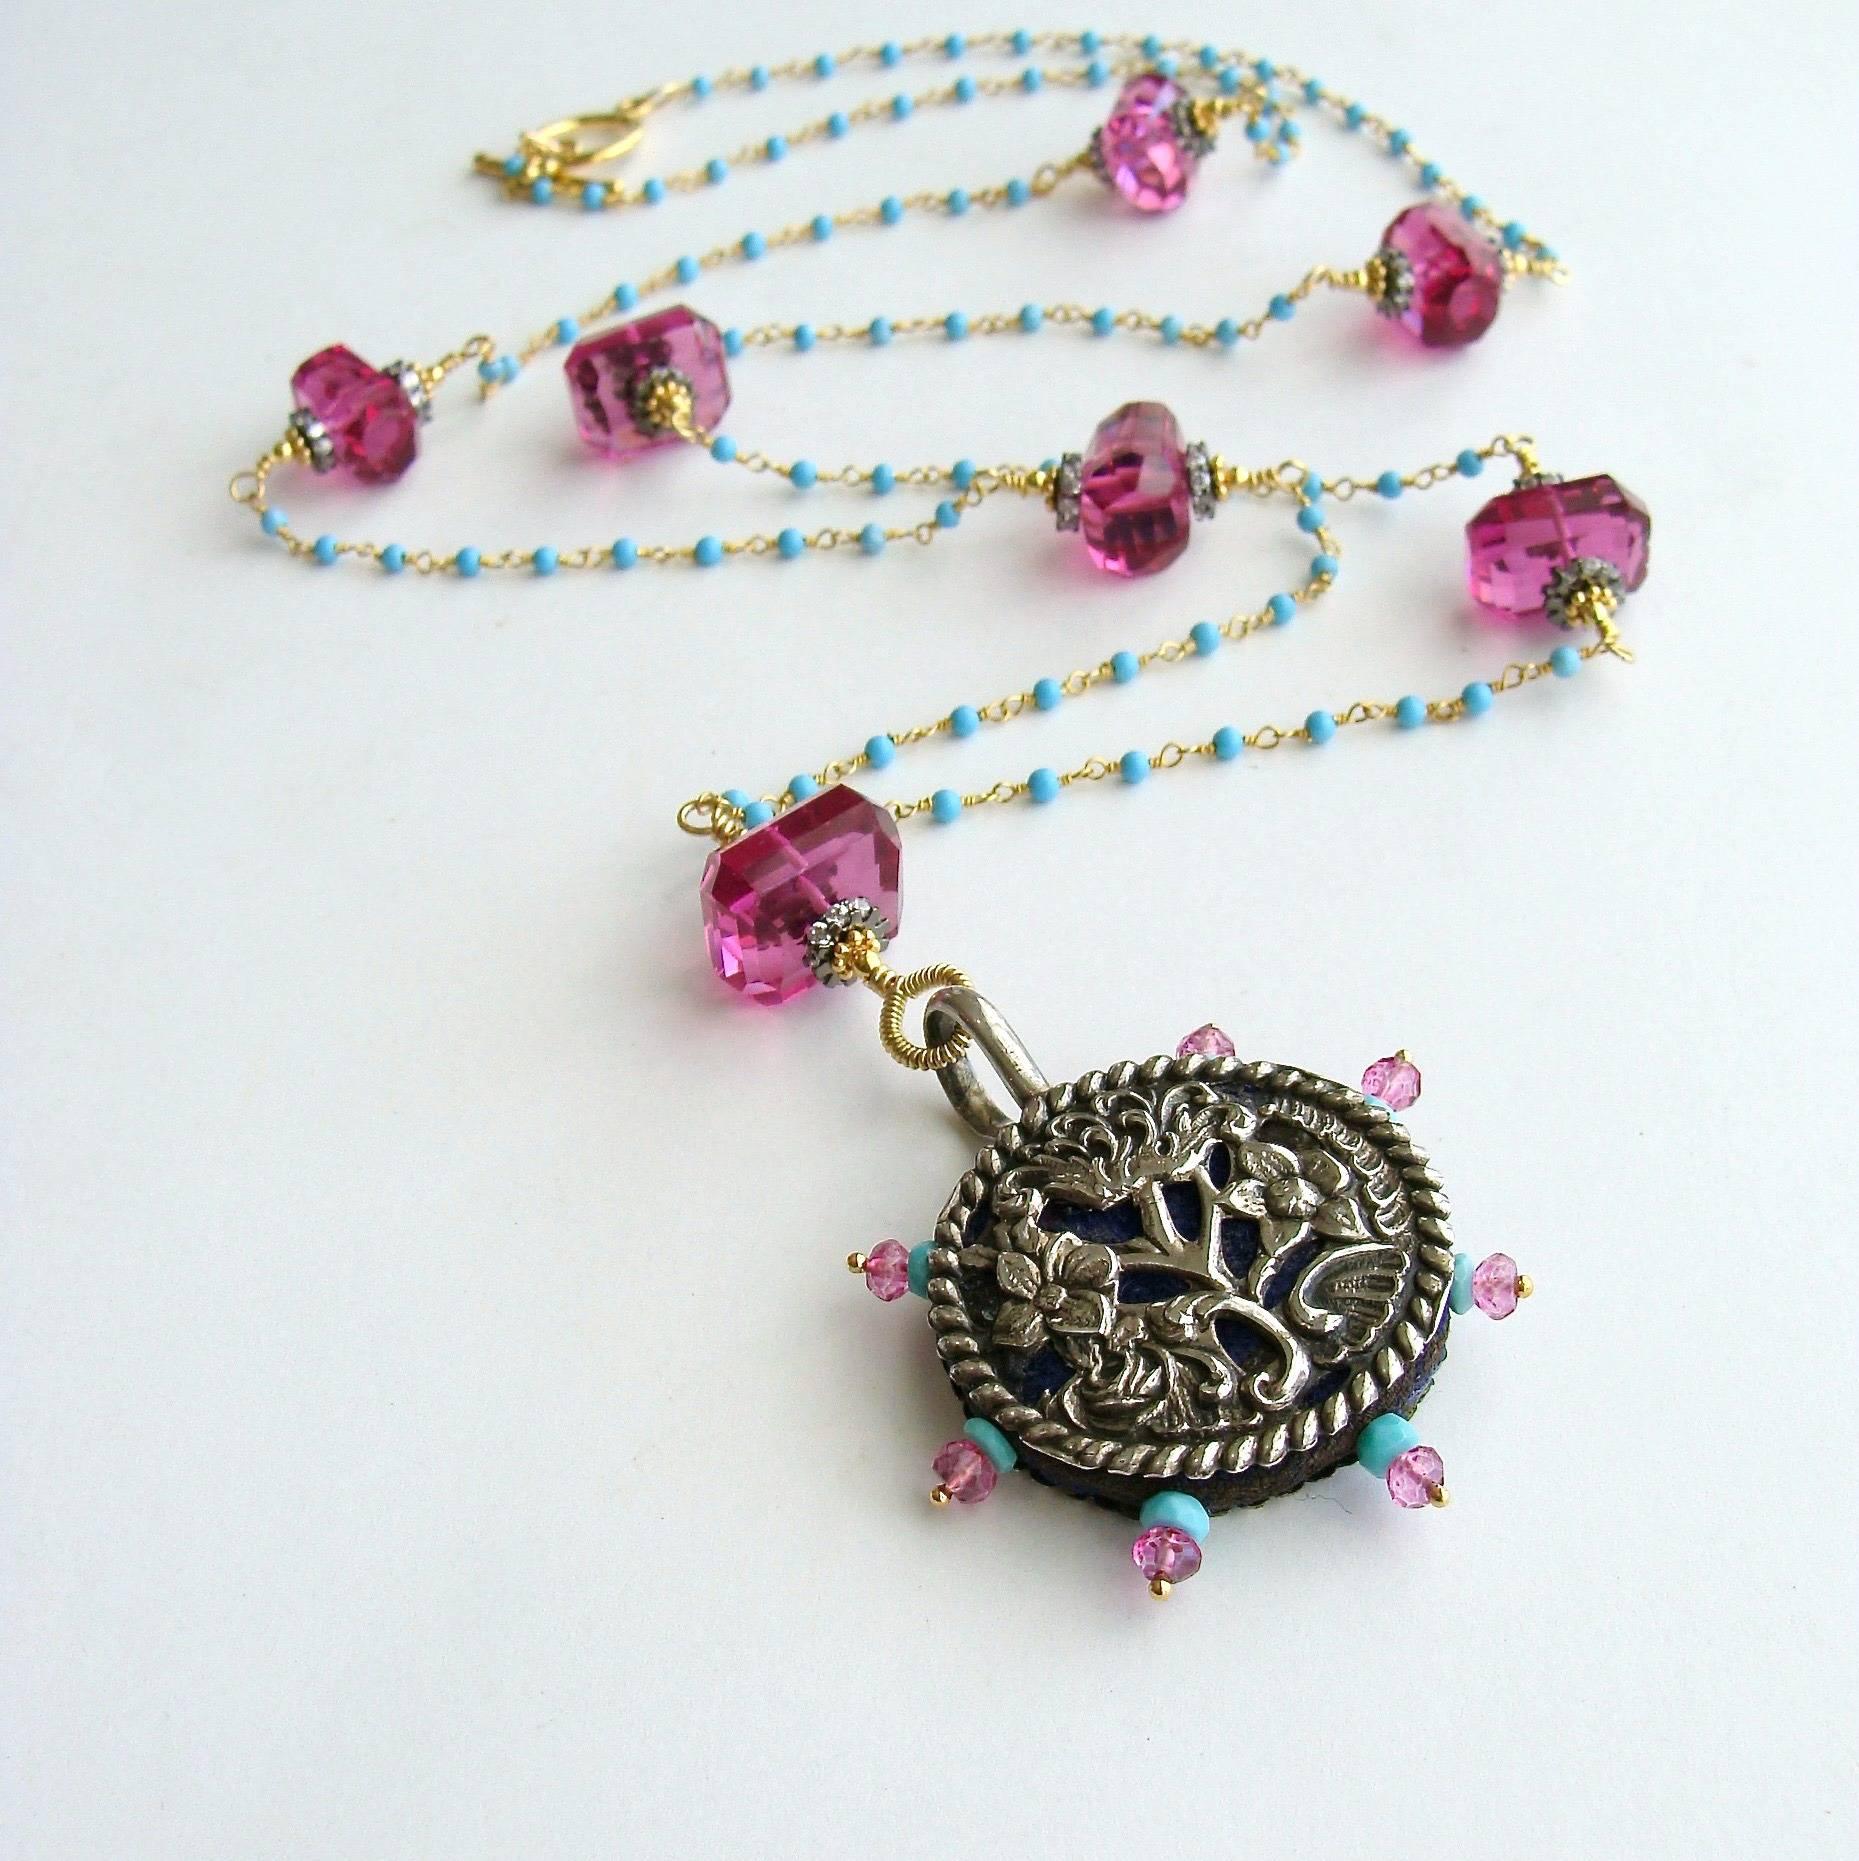 Serenity Necklace.

A beautiful silver English Victorian (c.1897) reticulated pin wheel, encrusted with Sleeping Beauty Turquoise and Pink Topaz - is the focal point of this charming long layering necklace.  These unique sewing etui were